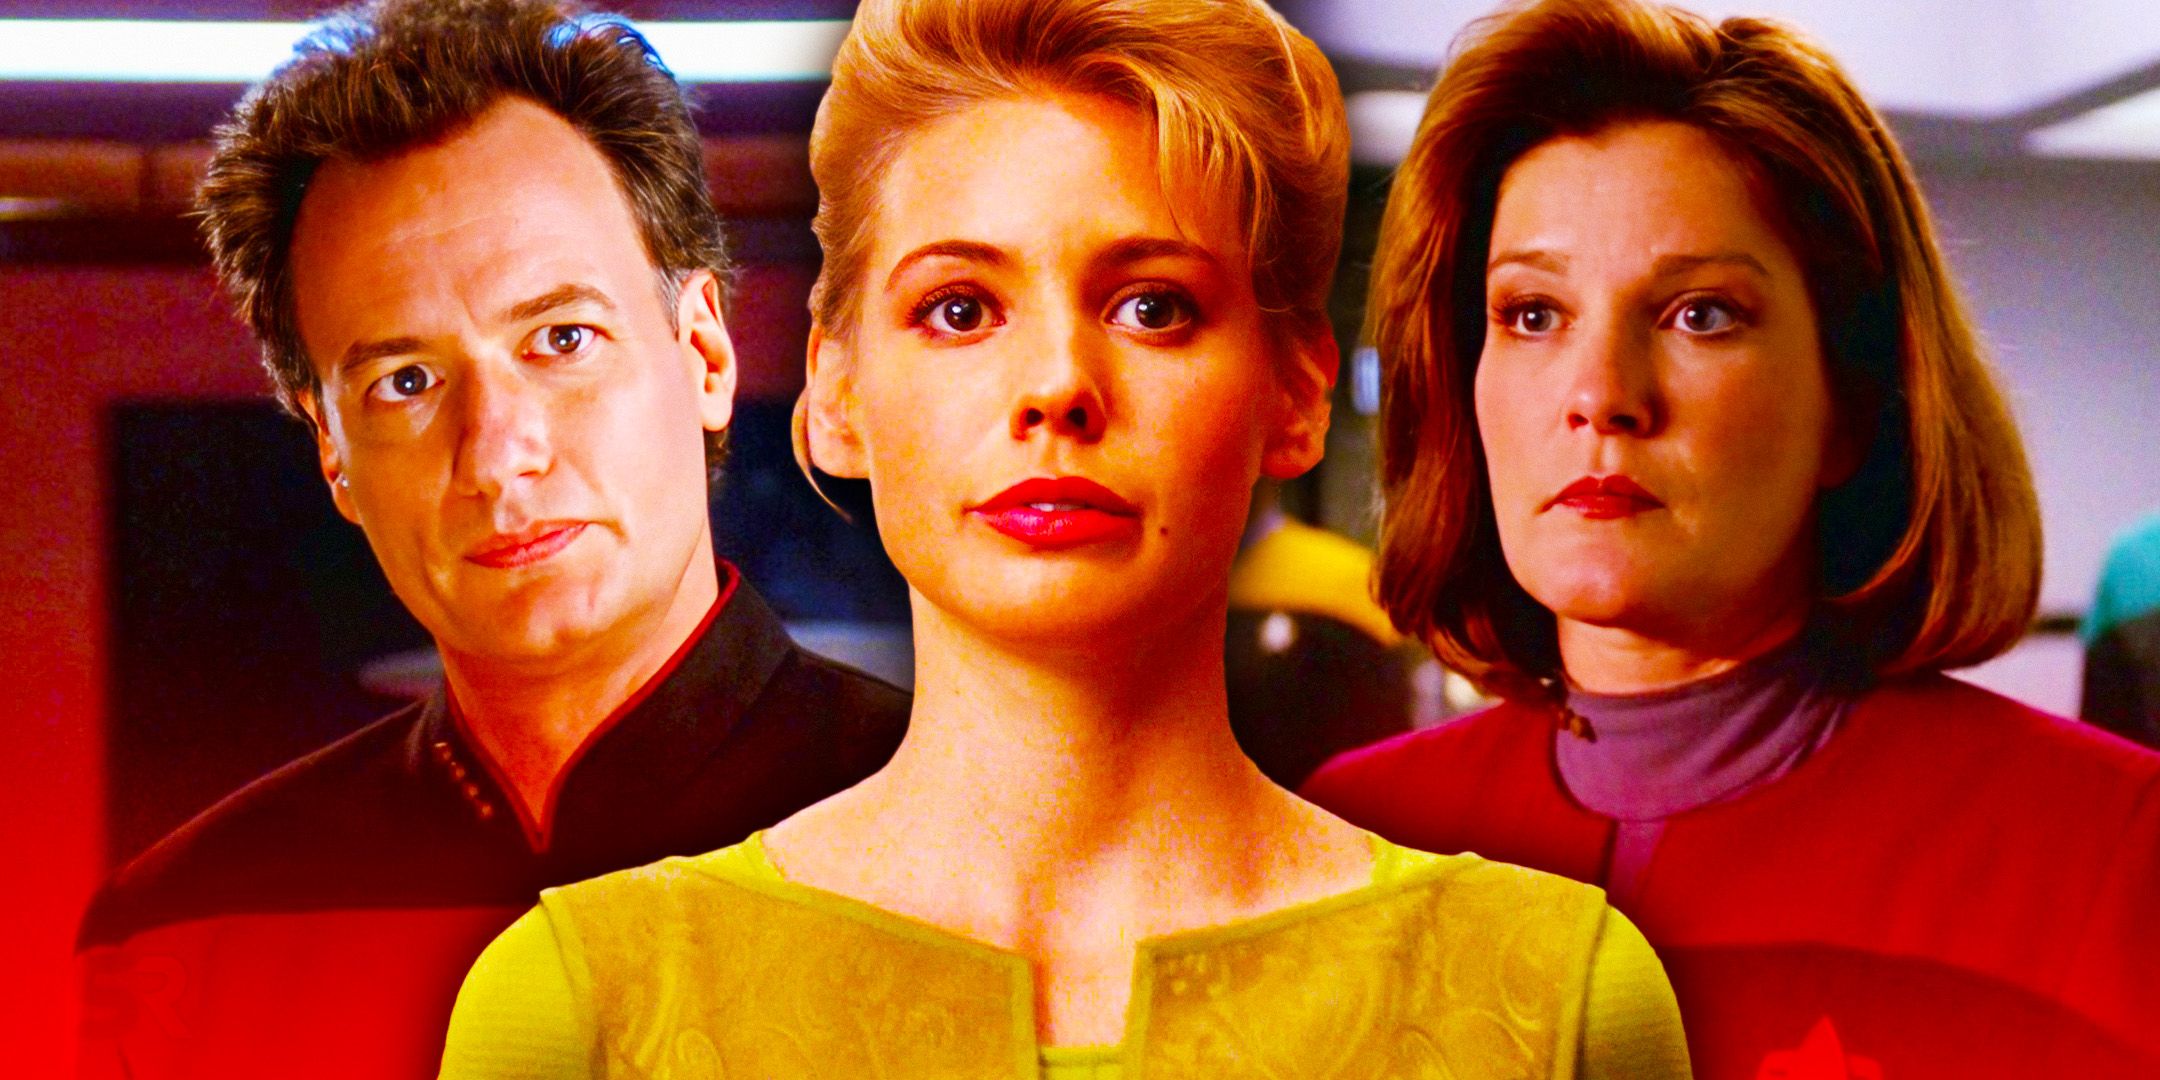 Collage of Q (John de Lancie), Captain Janeway (Kate Mulgrew), and Amanda Rogers (Olivia d'Abo) from Star Trek: Voyager and TNG with Amanda in the middle of the other two. 